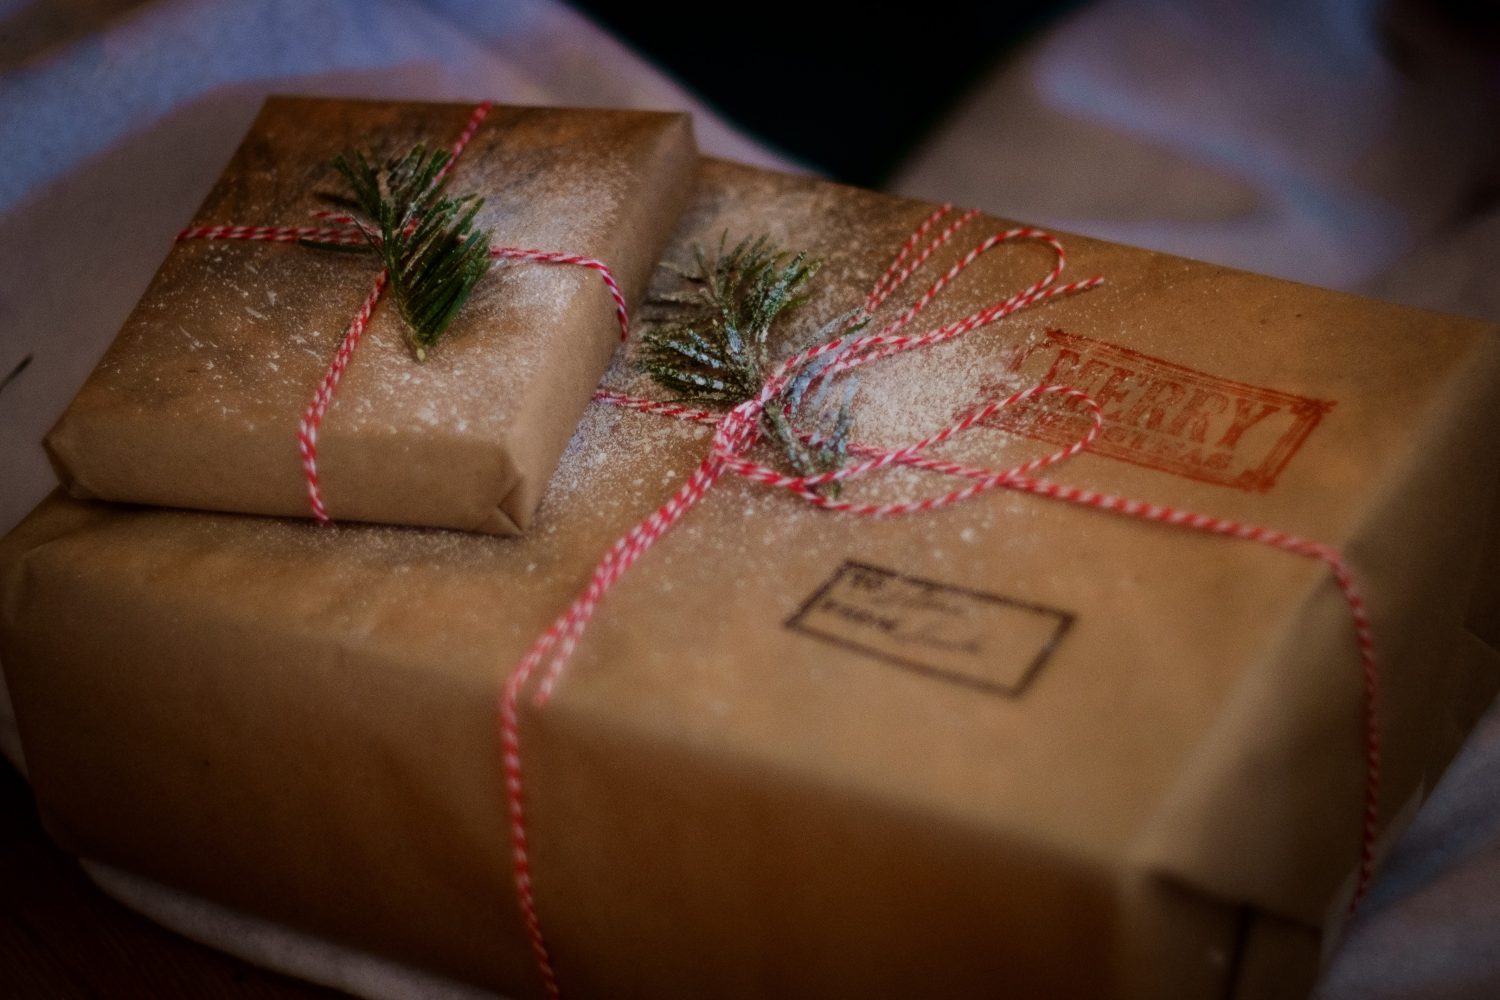 8 packages tied up with string traveling with gifts this holiday season